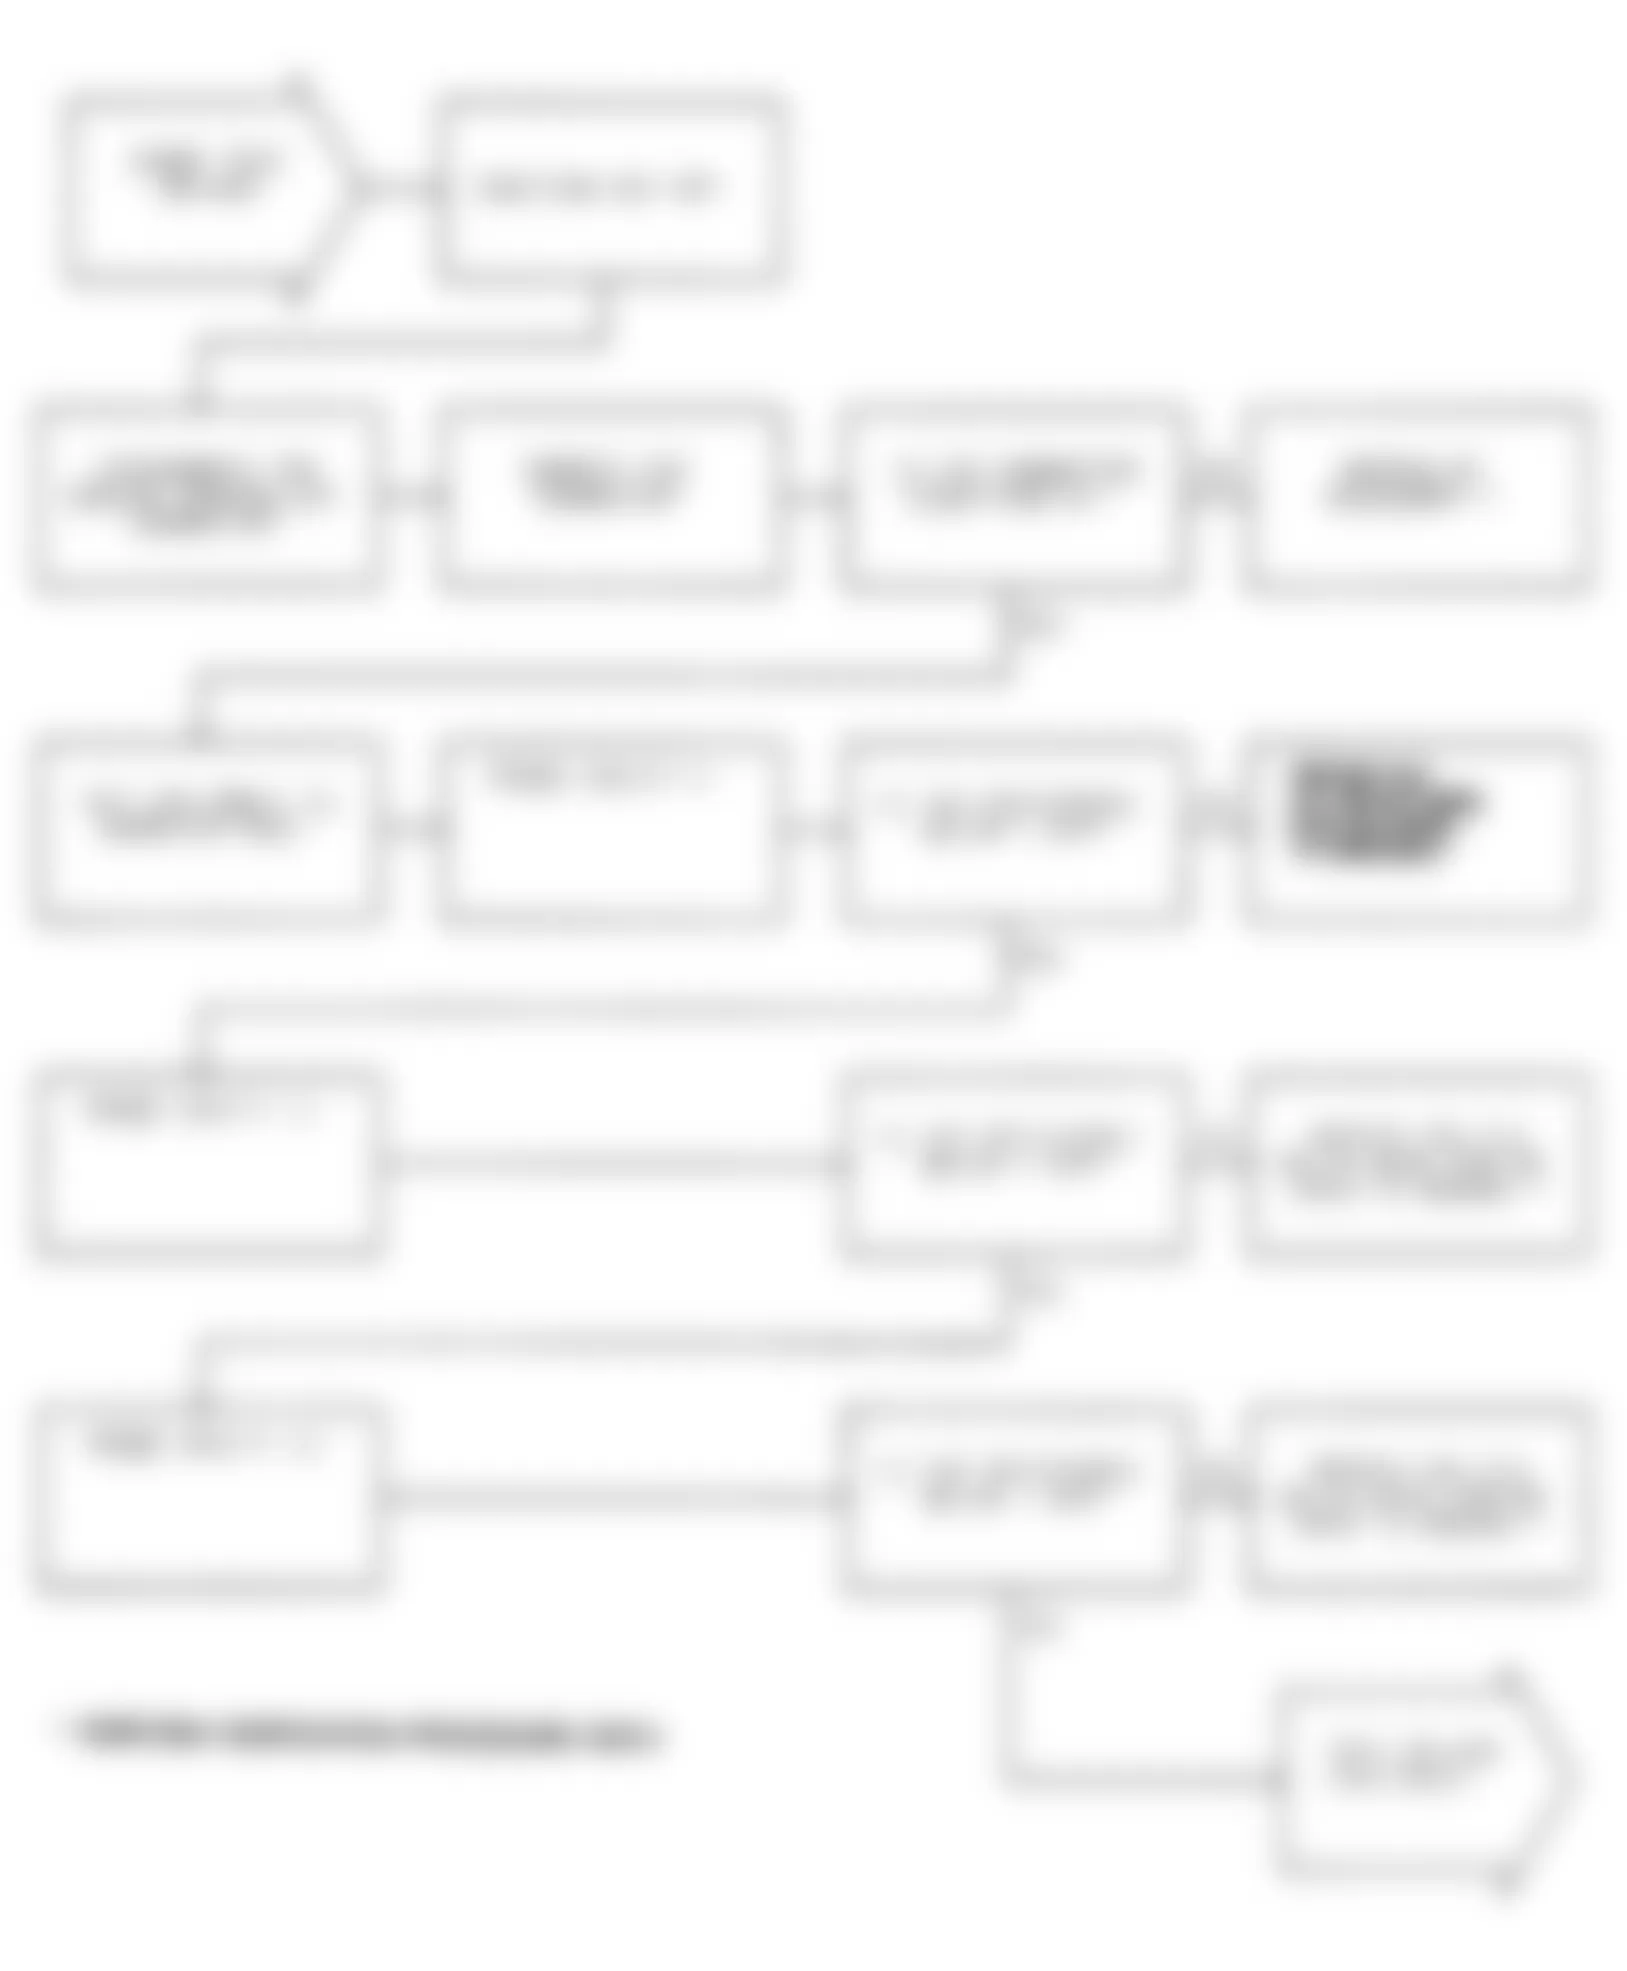 Chrysler Imperial 1991 - Component Locations -  Test DR-40A: Flowchart (1 of 2)